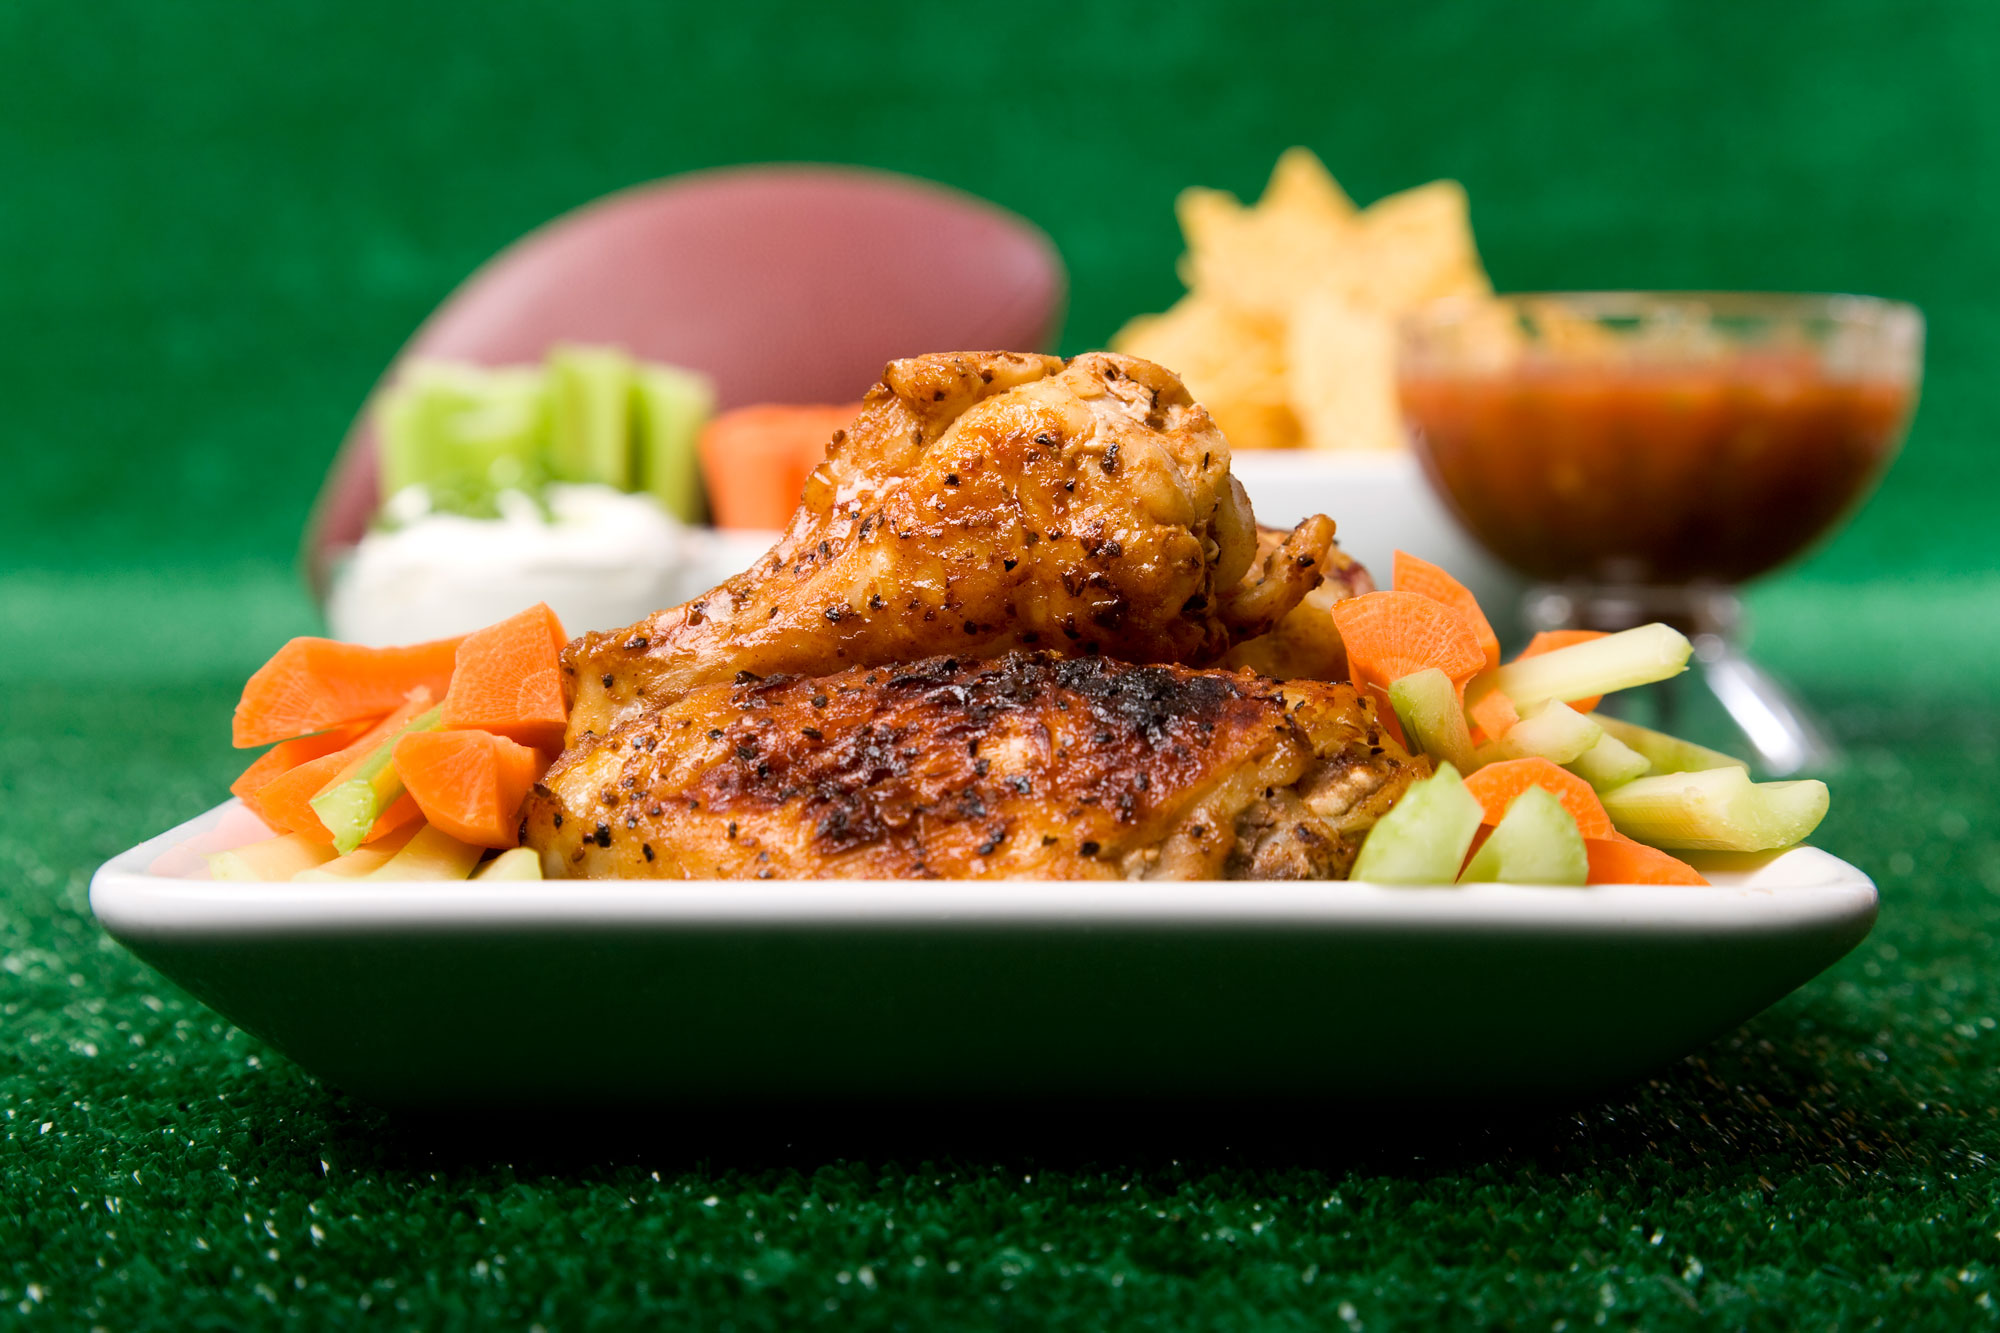 Close up of a full plate of spicy chicken wings with celery and carrot sticks along with championship game party items in the background